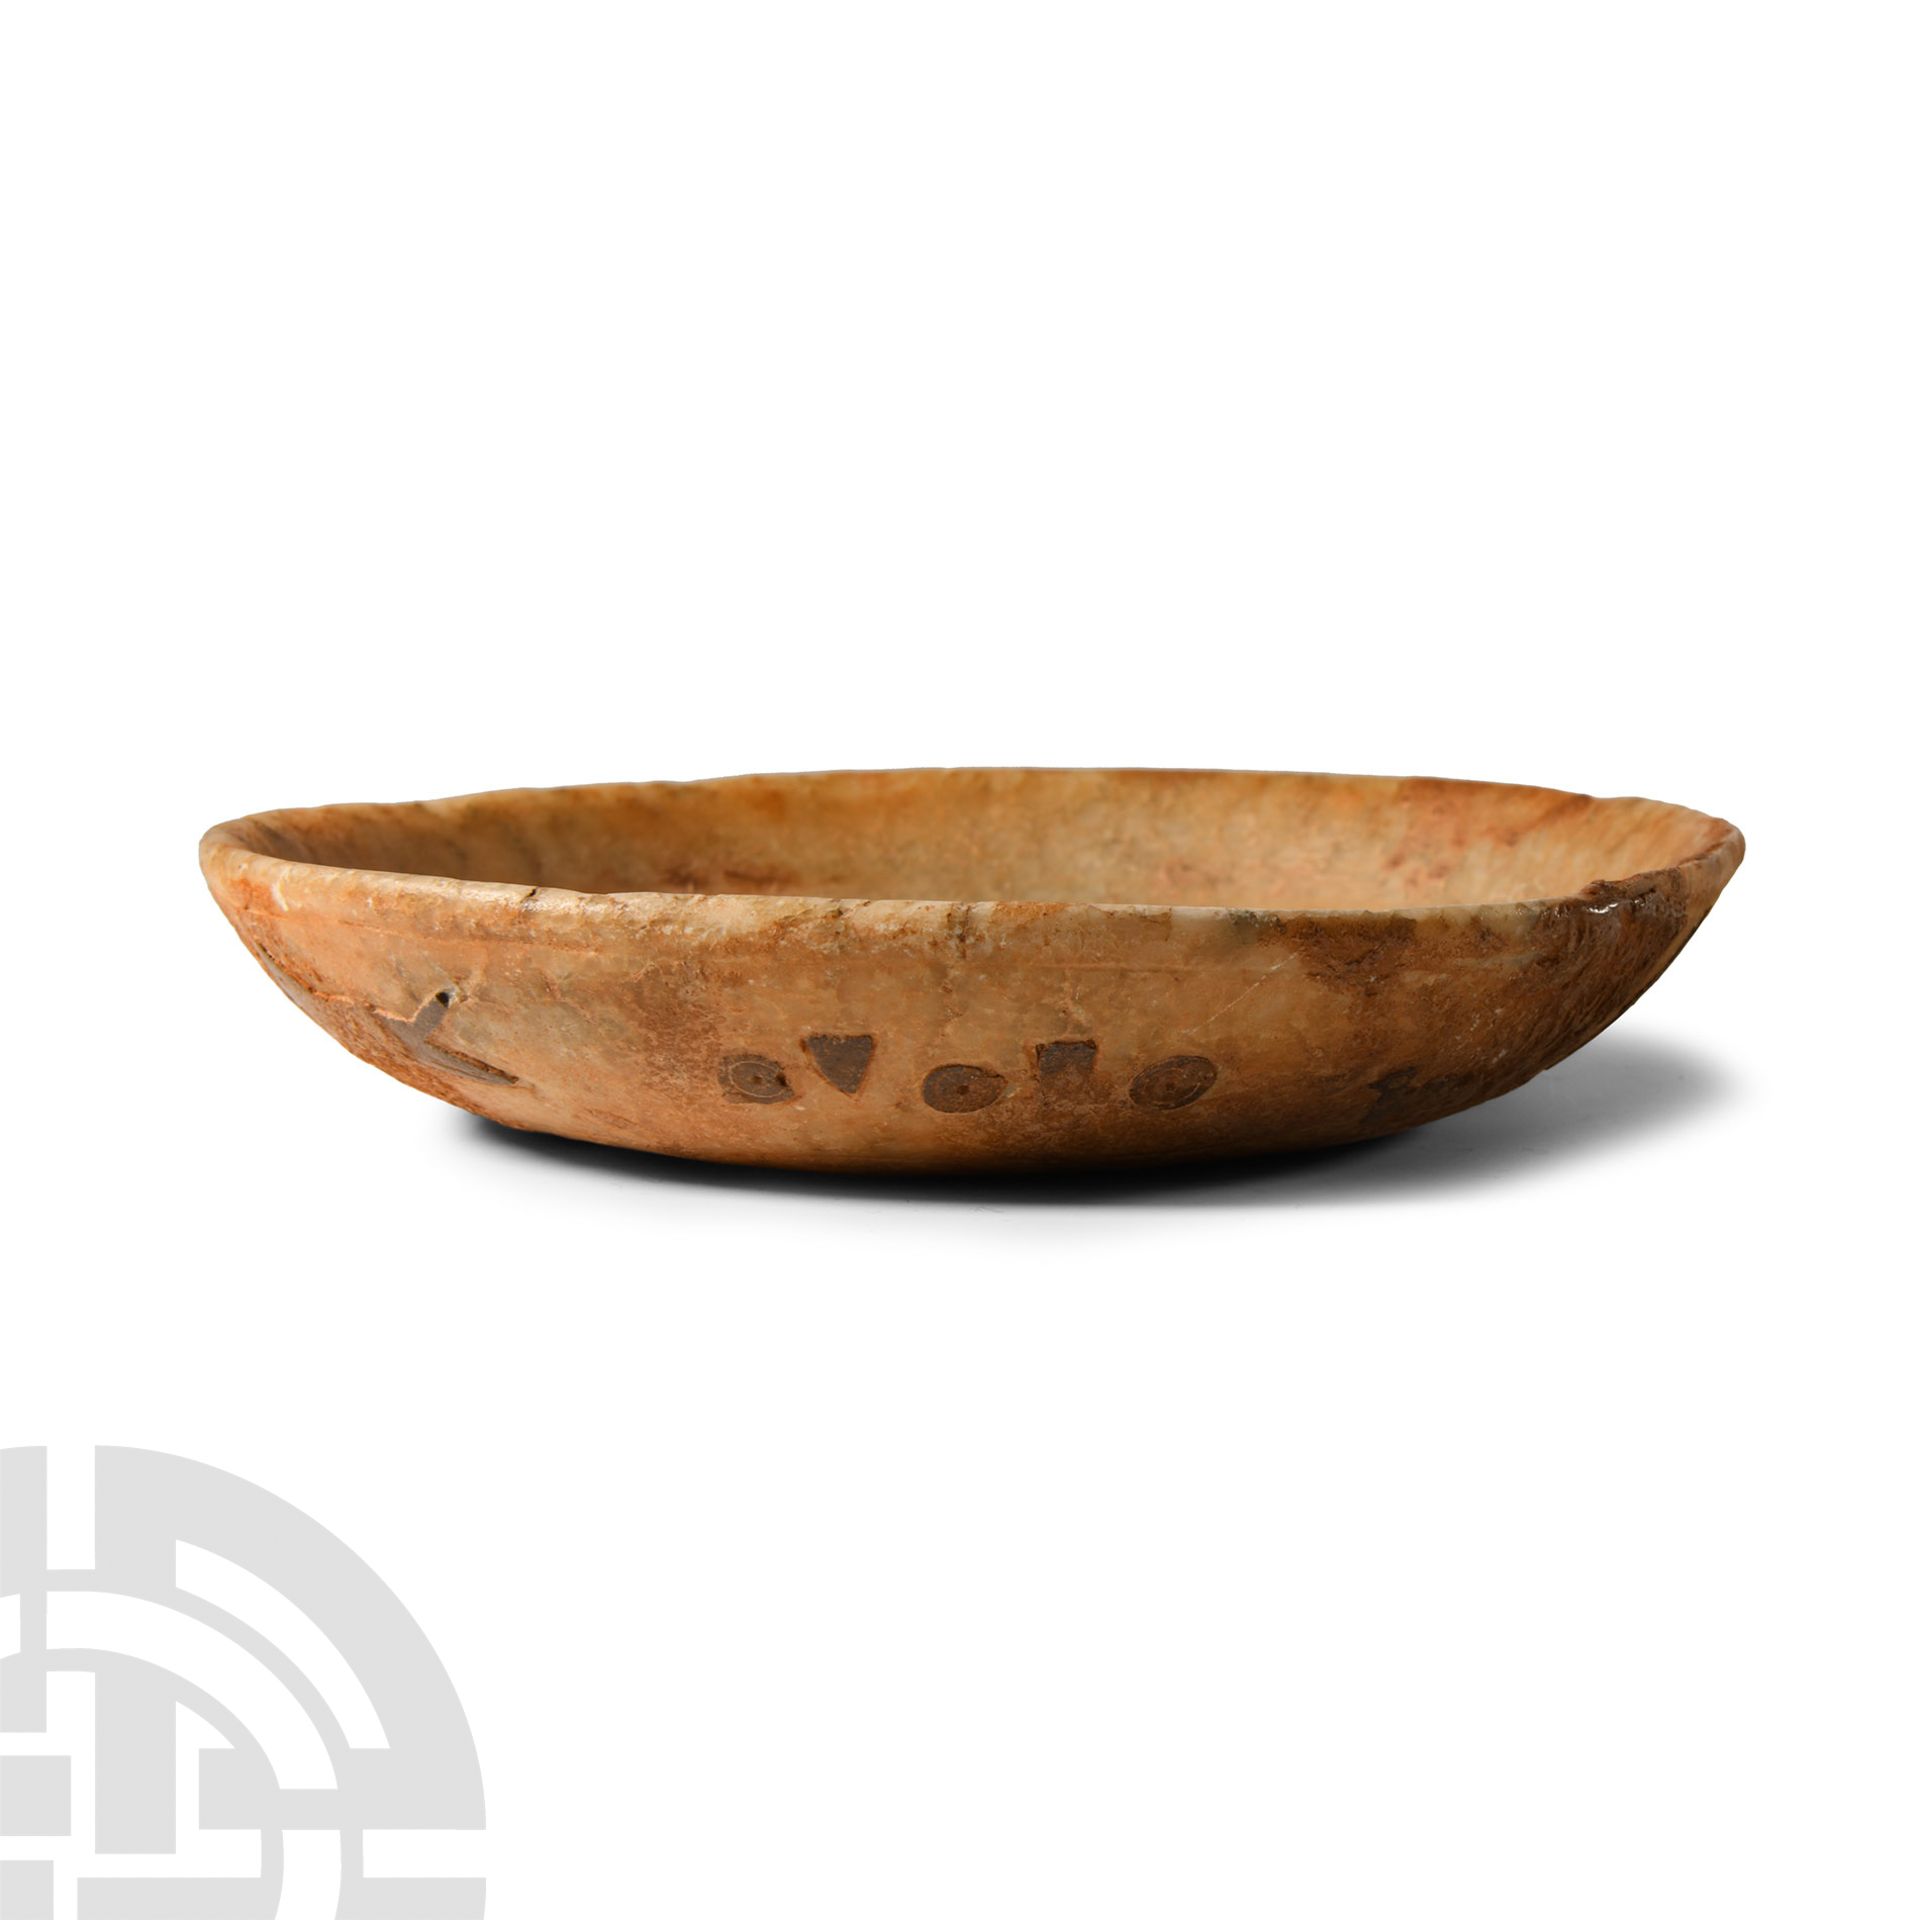 Mesopotamian Alabaster Bowl with Inlaid Animals - Image 2 of 2